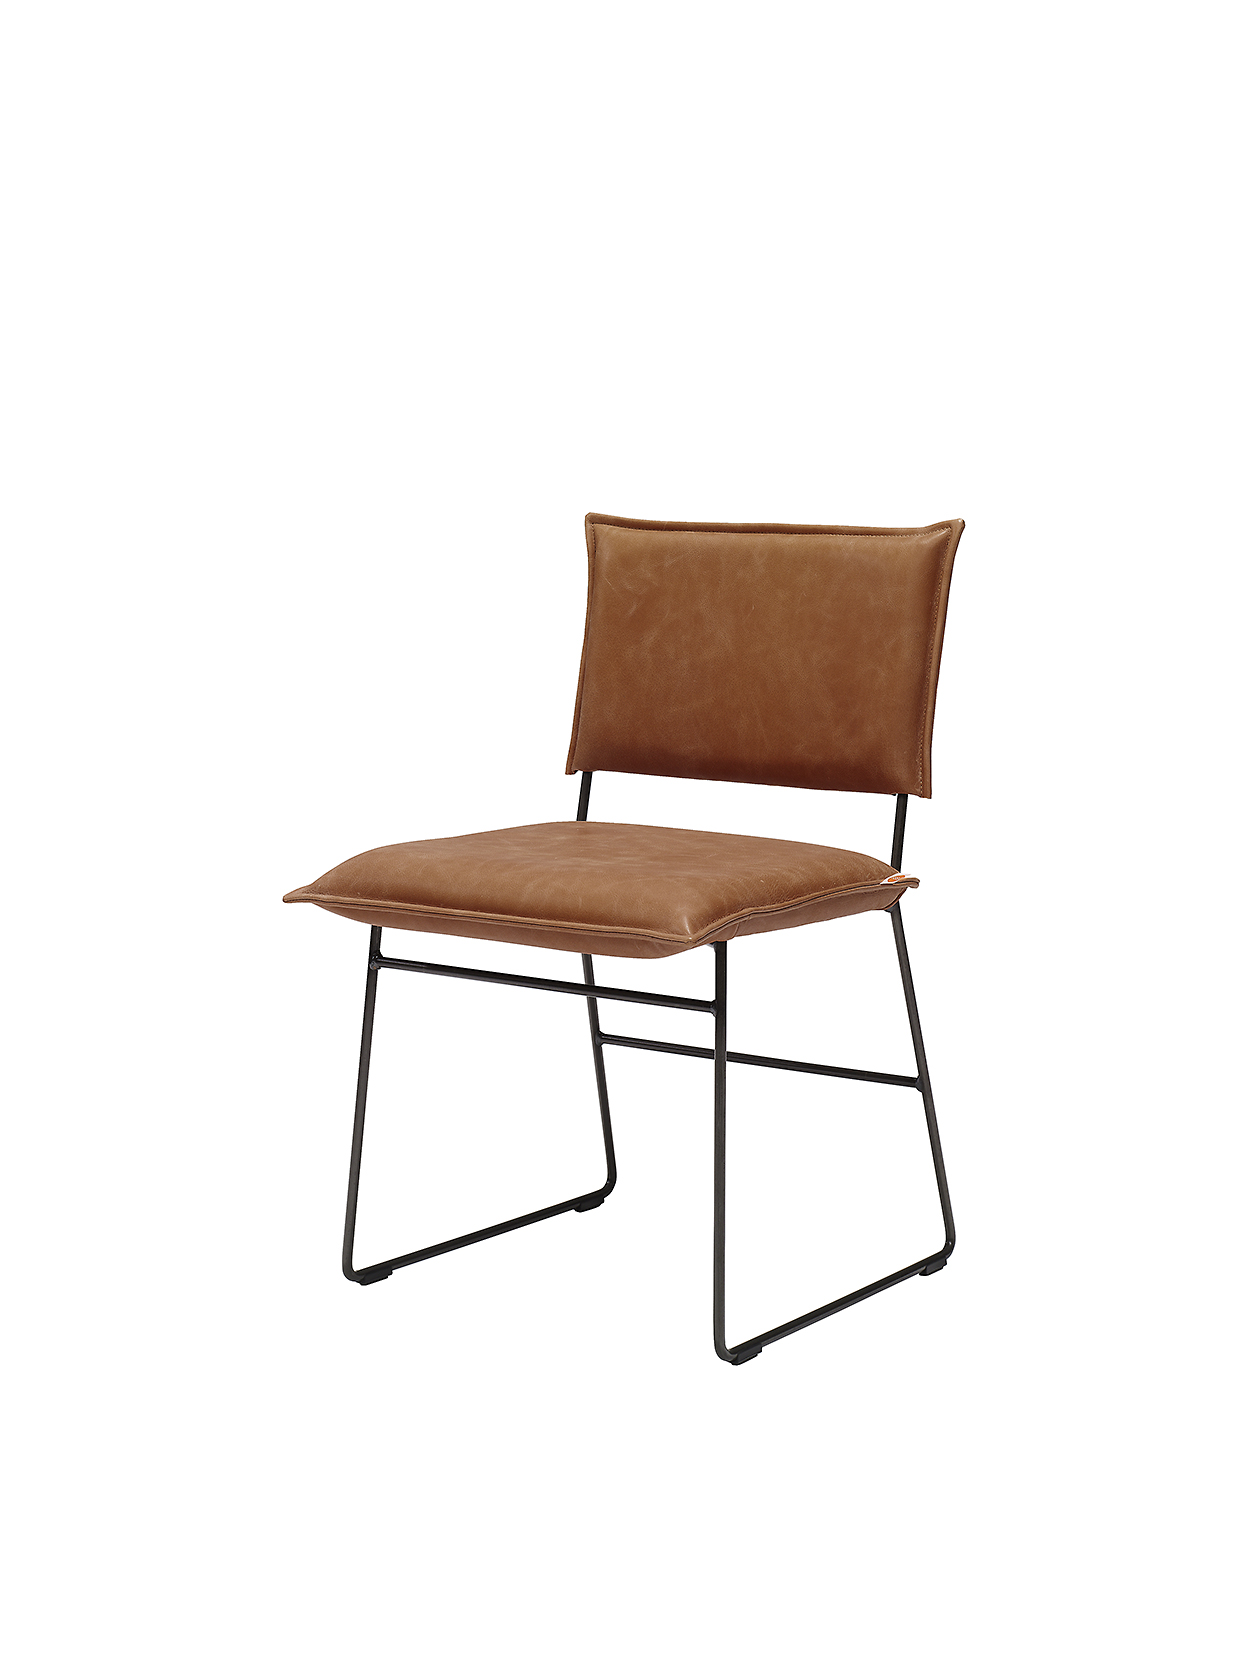 Norman Chair Without Arm Bonanza Tan Pers LR ZS 8720153744454